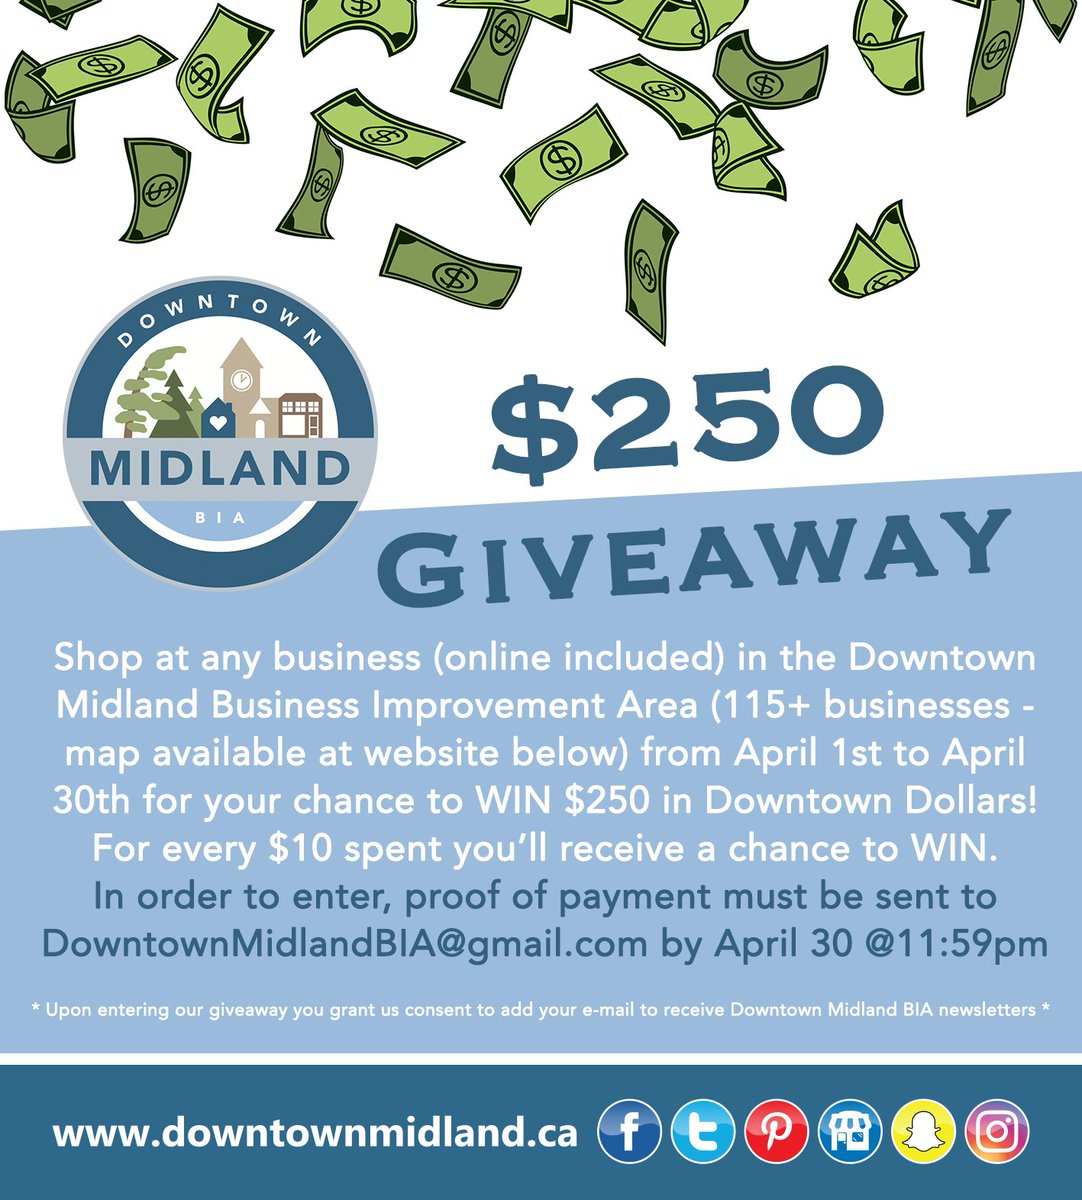 Shop at any business (online included) in the Downtown Midland Business Improvement Area (115+ businesses) from April 1st to April 30th for your chance to WIN $250 in Downtown Dollars! DETAILS: downtownmidland.ca/events #DMShopLocalGiveaway #DowntownMidlandON